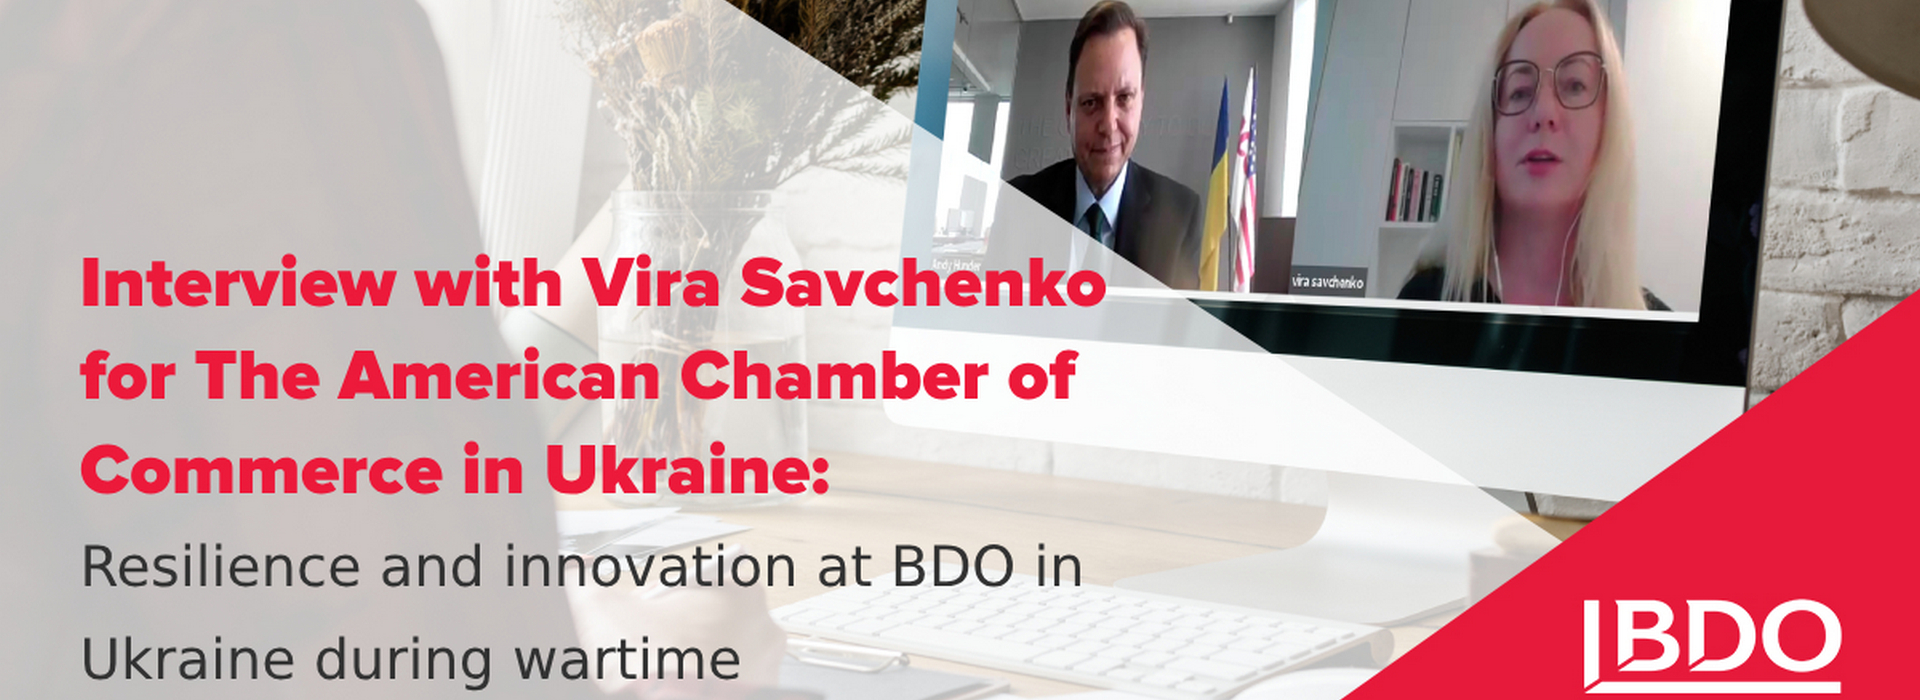 Interview with Vira Savchenko for the American Chamber of Commerce in Ukraine: Resilience and Innovation at BDO in Ukraine During Wartime